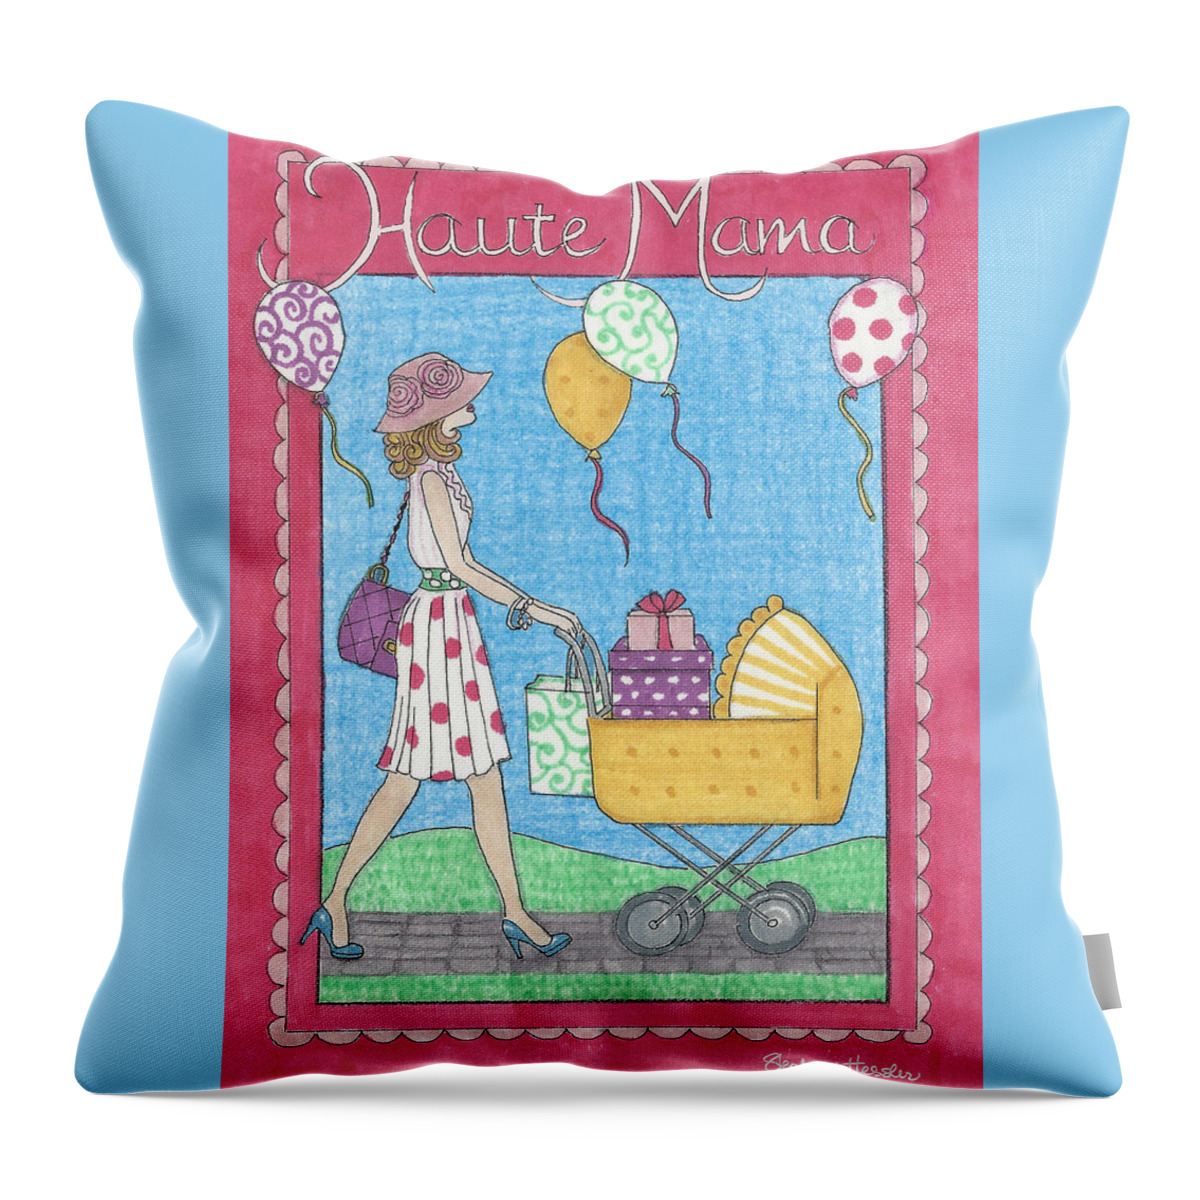 Mama Throw Pillow featuring the mixed media Haute Mama by Stephanie Hessler